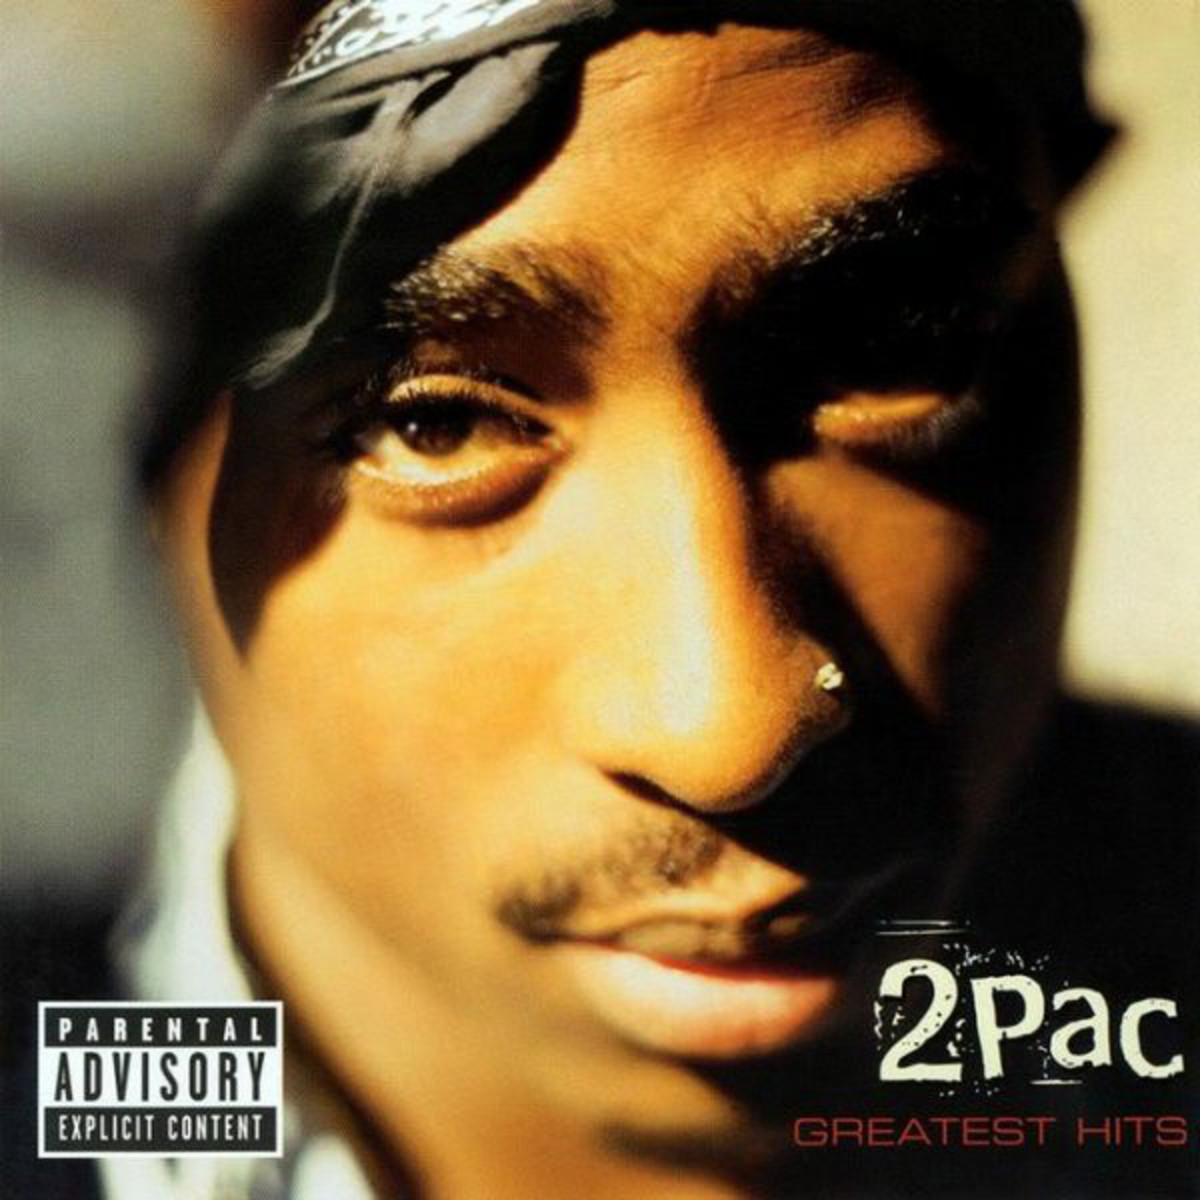 "2Pac Greatest Hits" by 2Pac